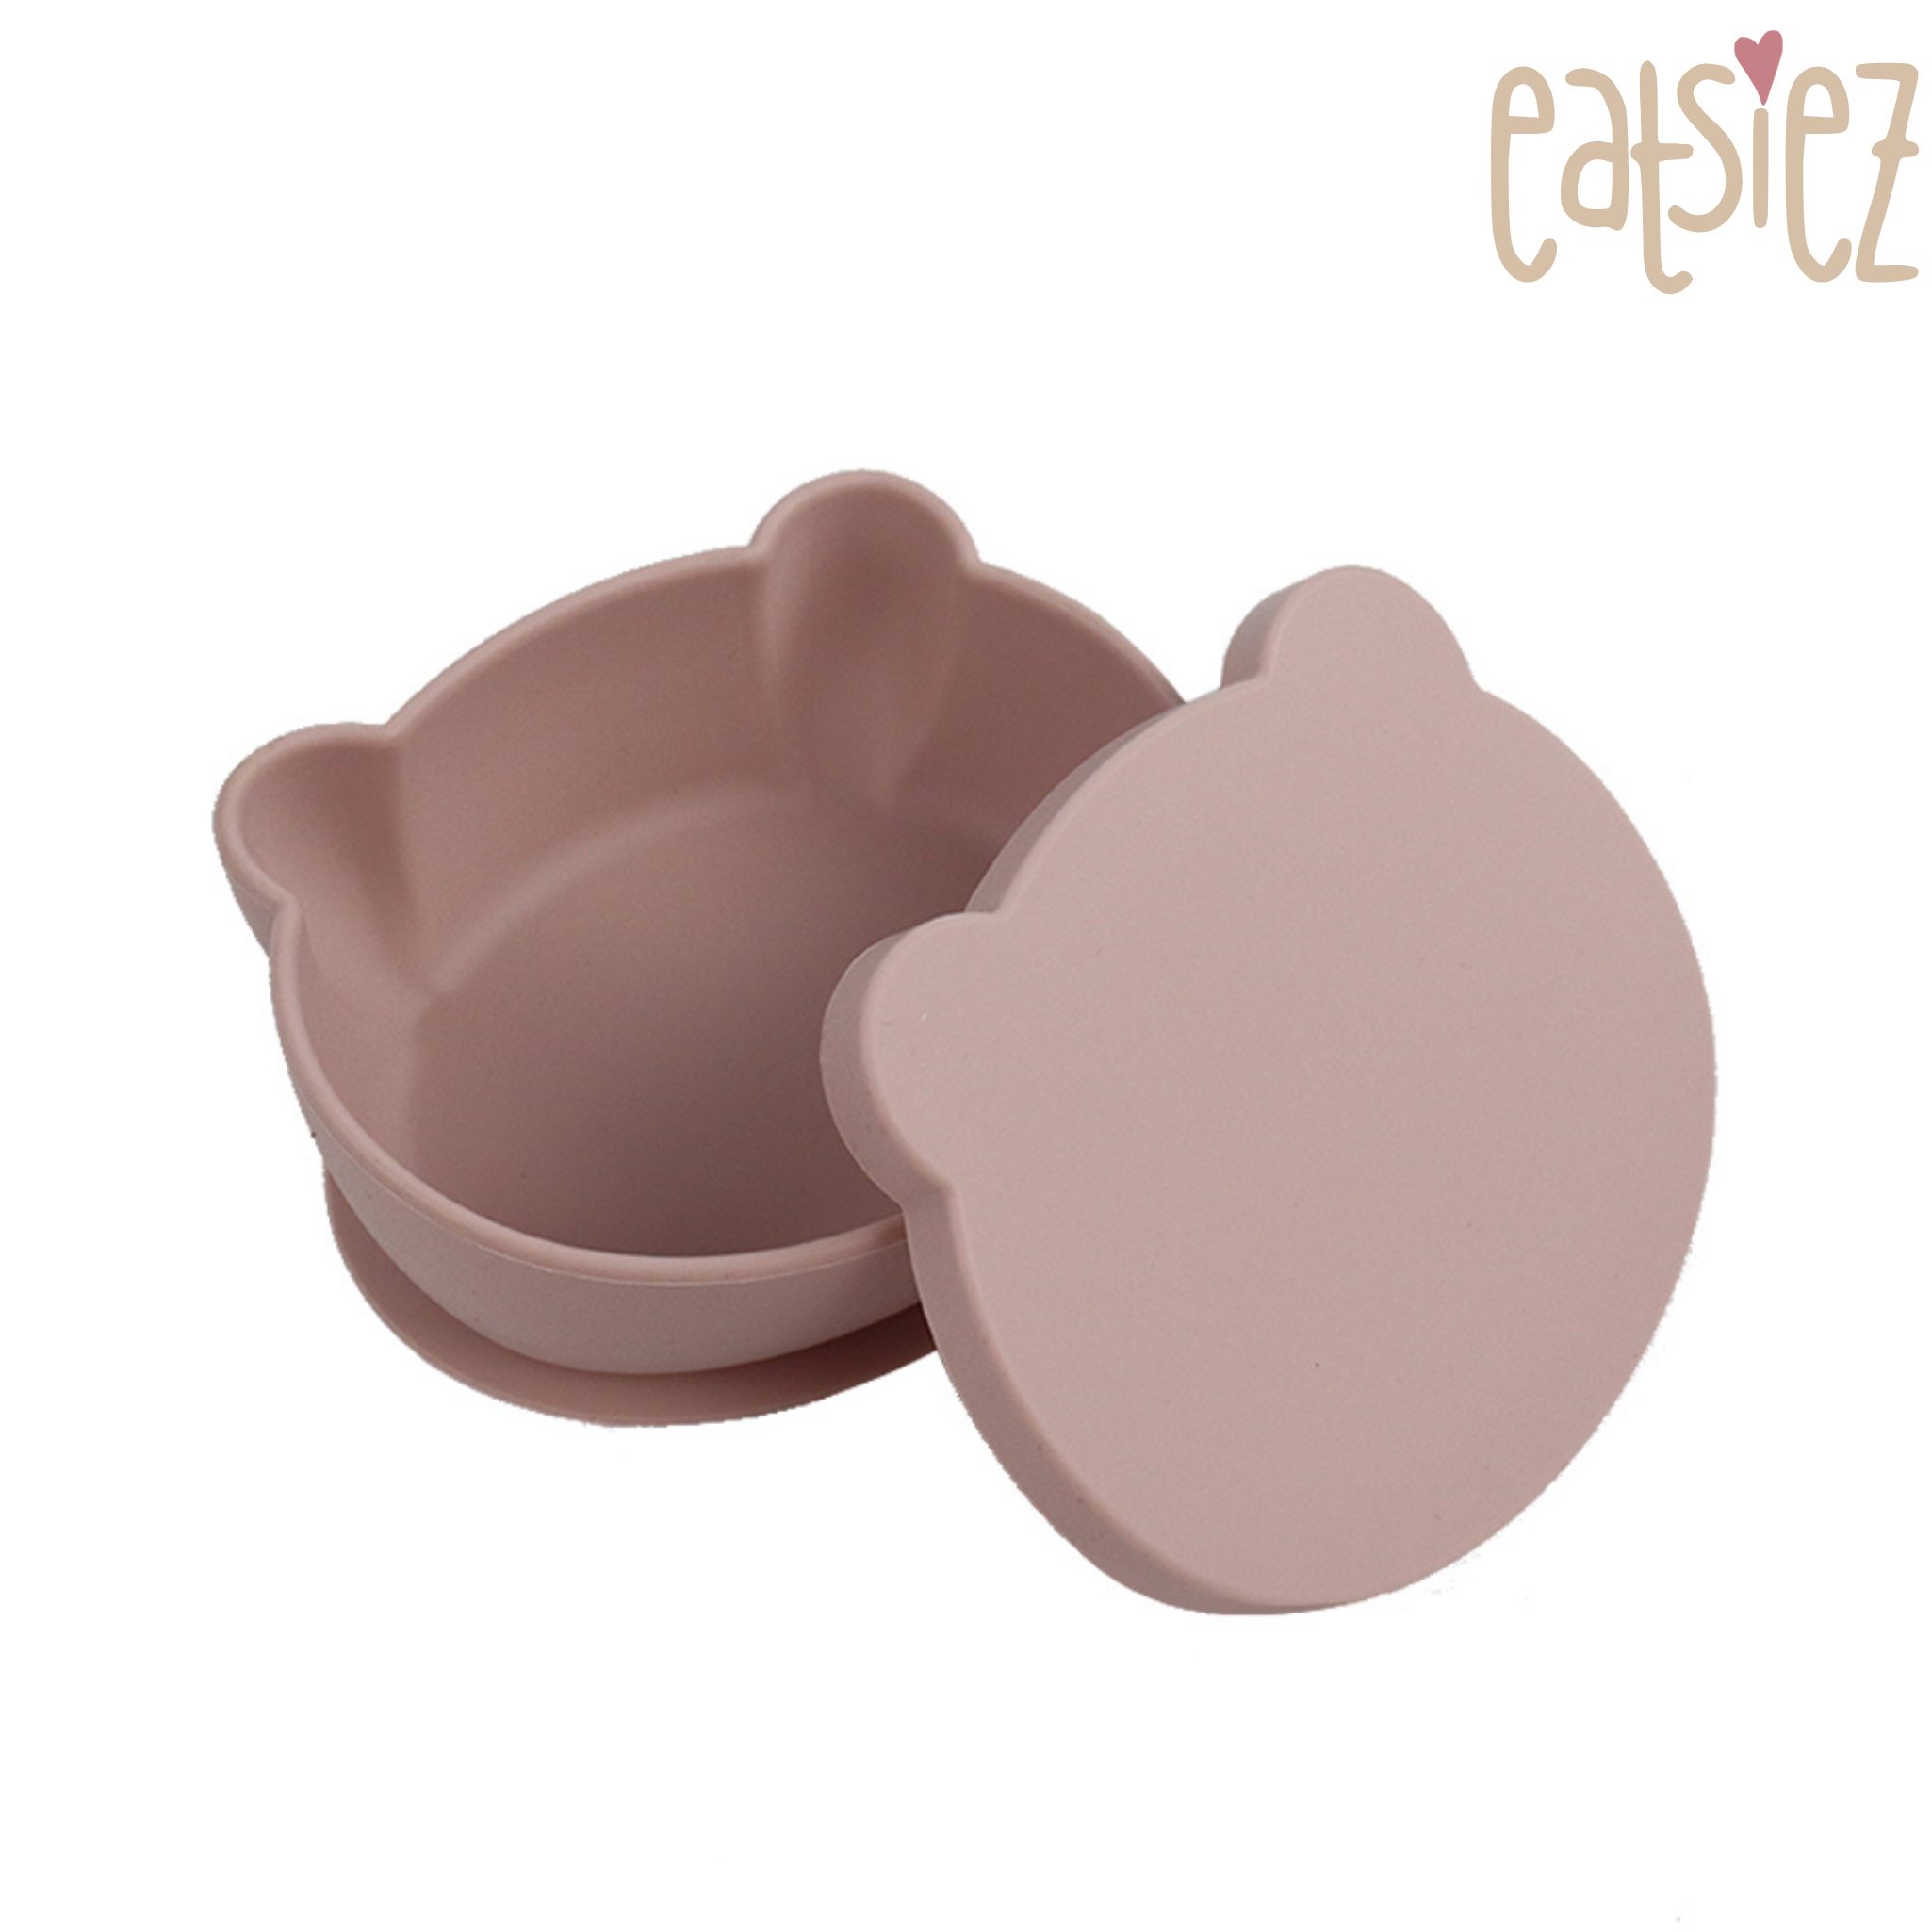 Eatsiez Suction Bowl with Lid